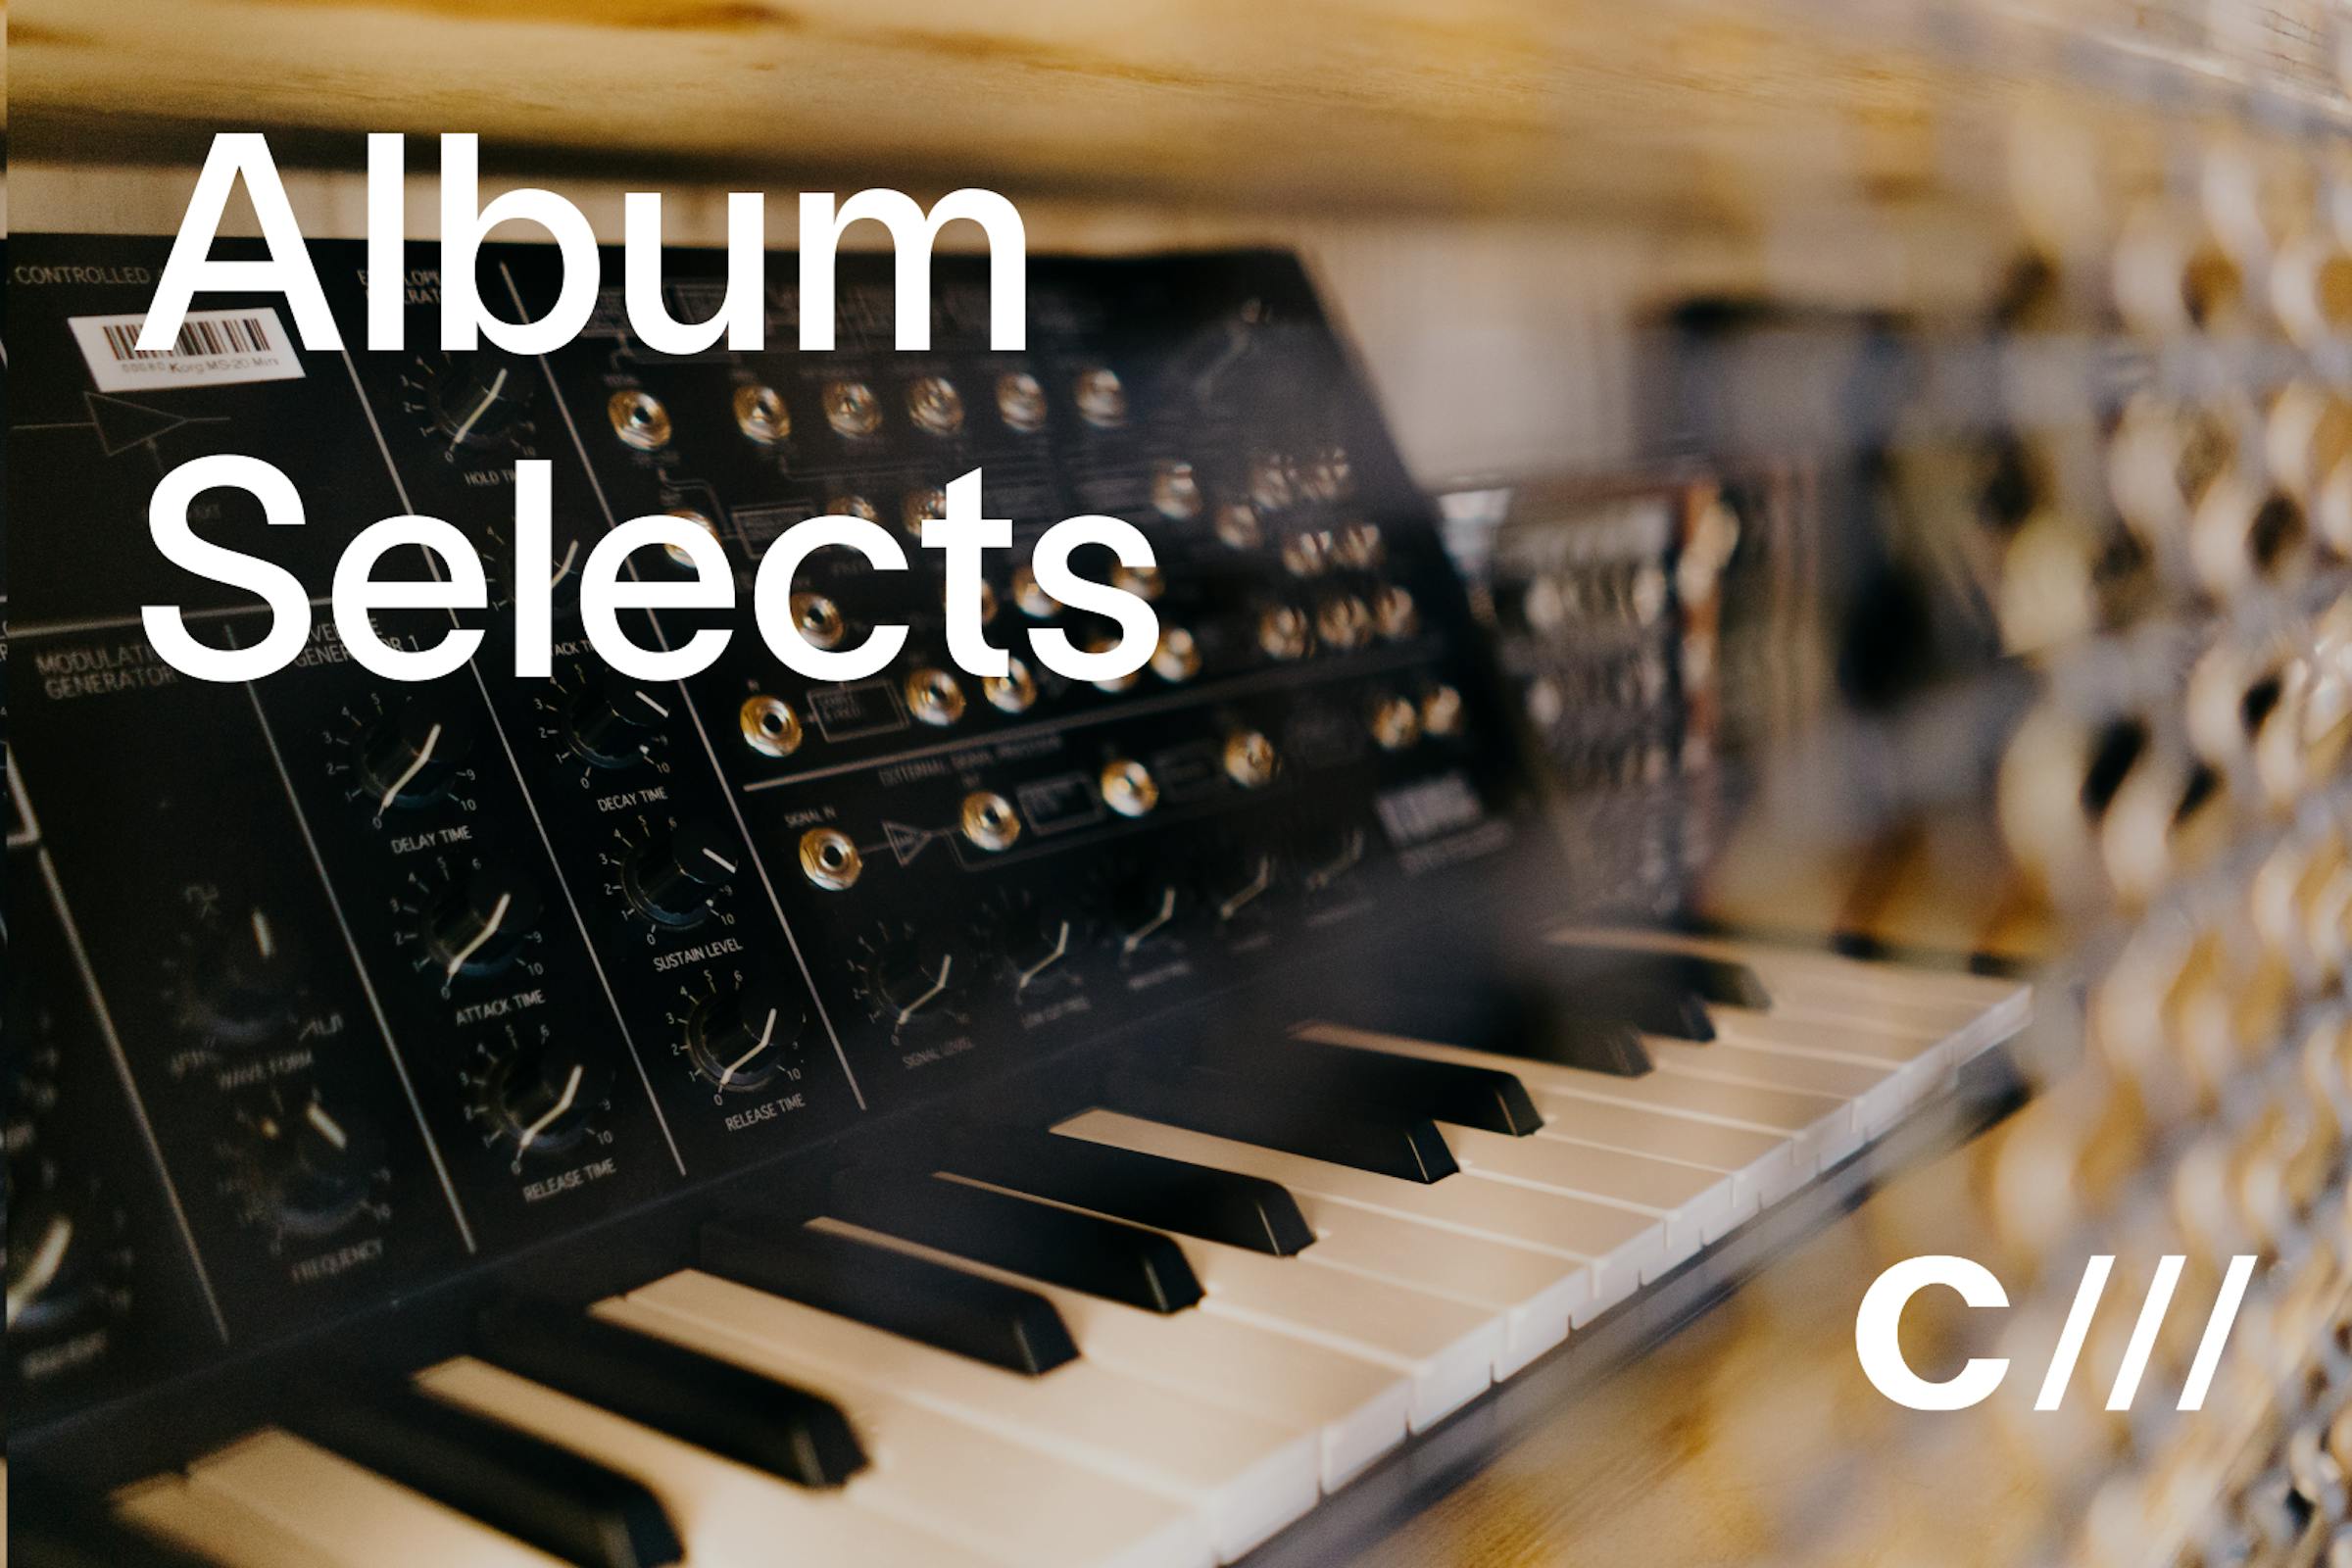 CAP Selects: Albums - a weekly series showcasing the outstanding work of Catalyst Berlin Creative Audio Production & Sound Engineering students